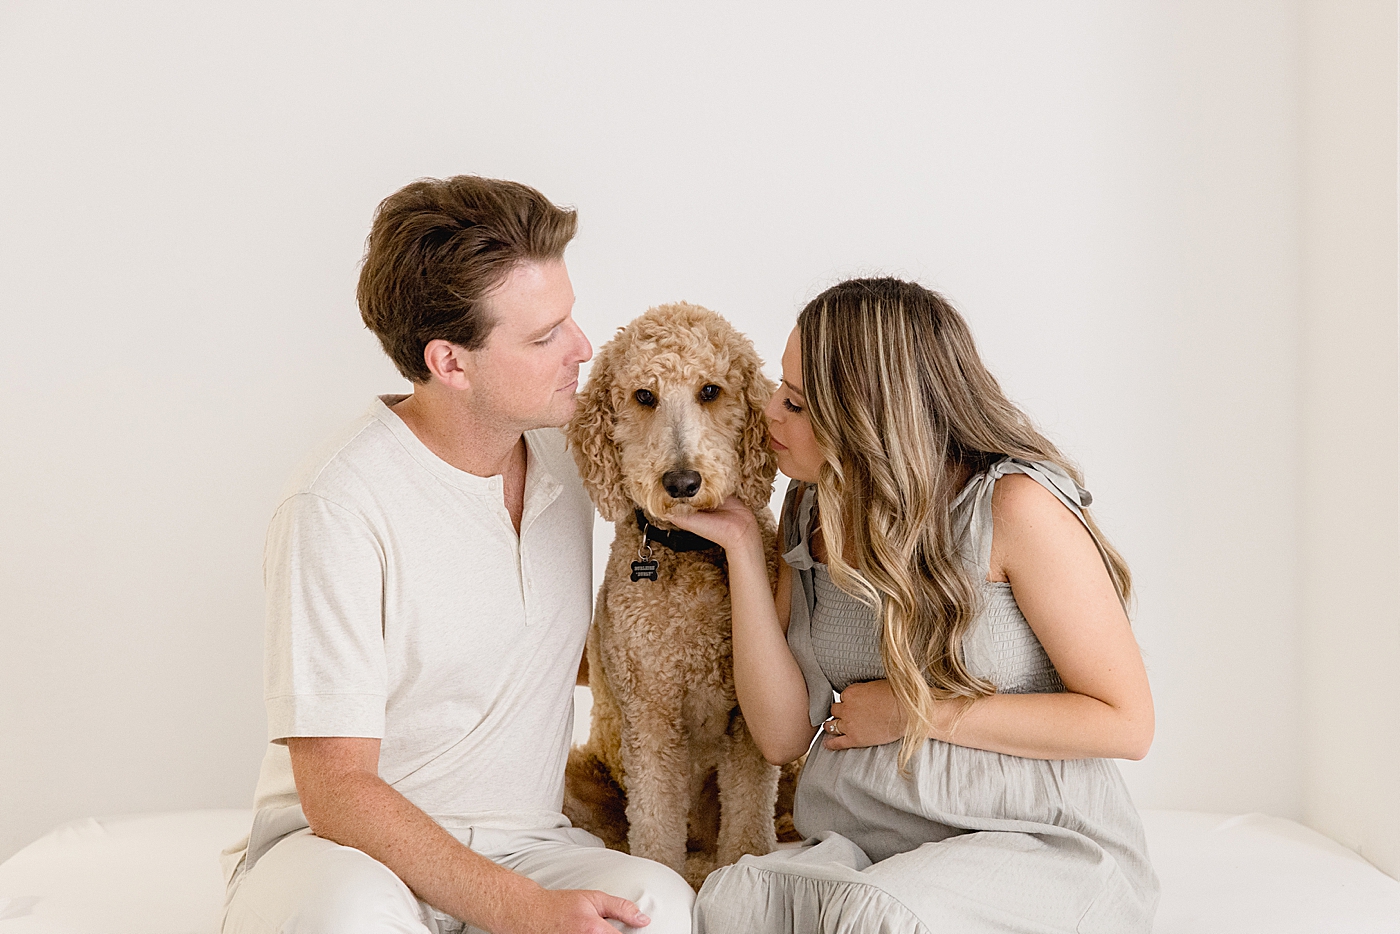 Mom and dad to be sitting on a bed with their dog in the studio | Image by Halleigh Hill